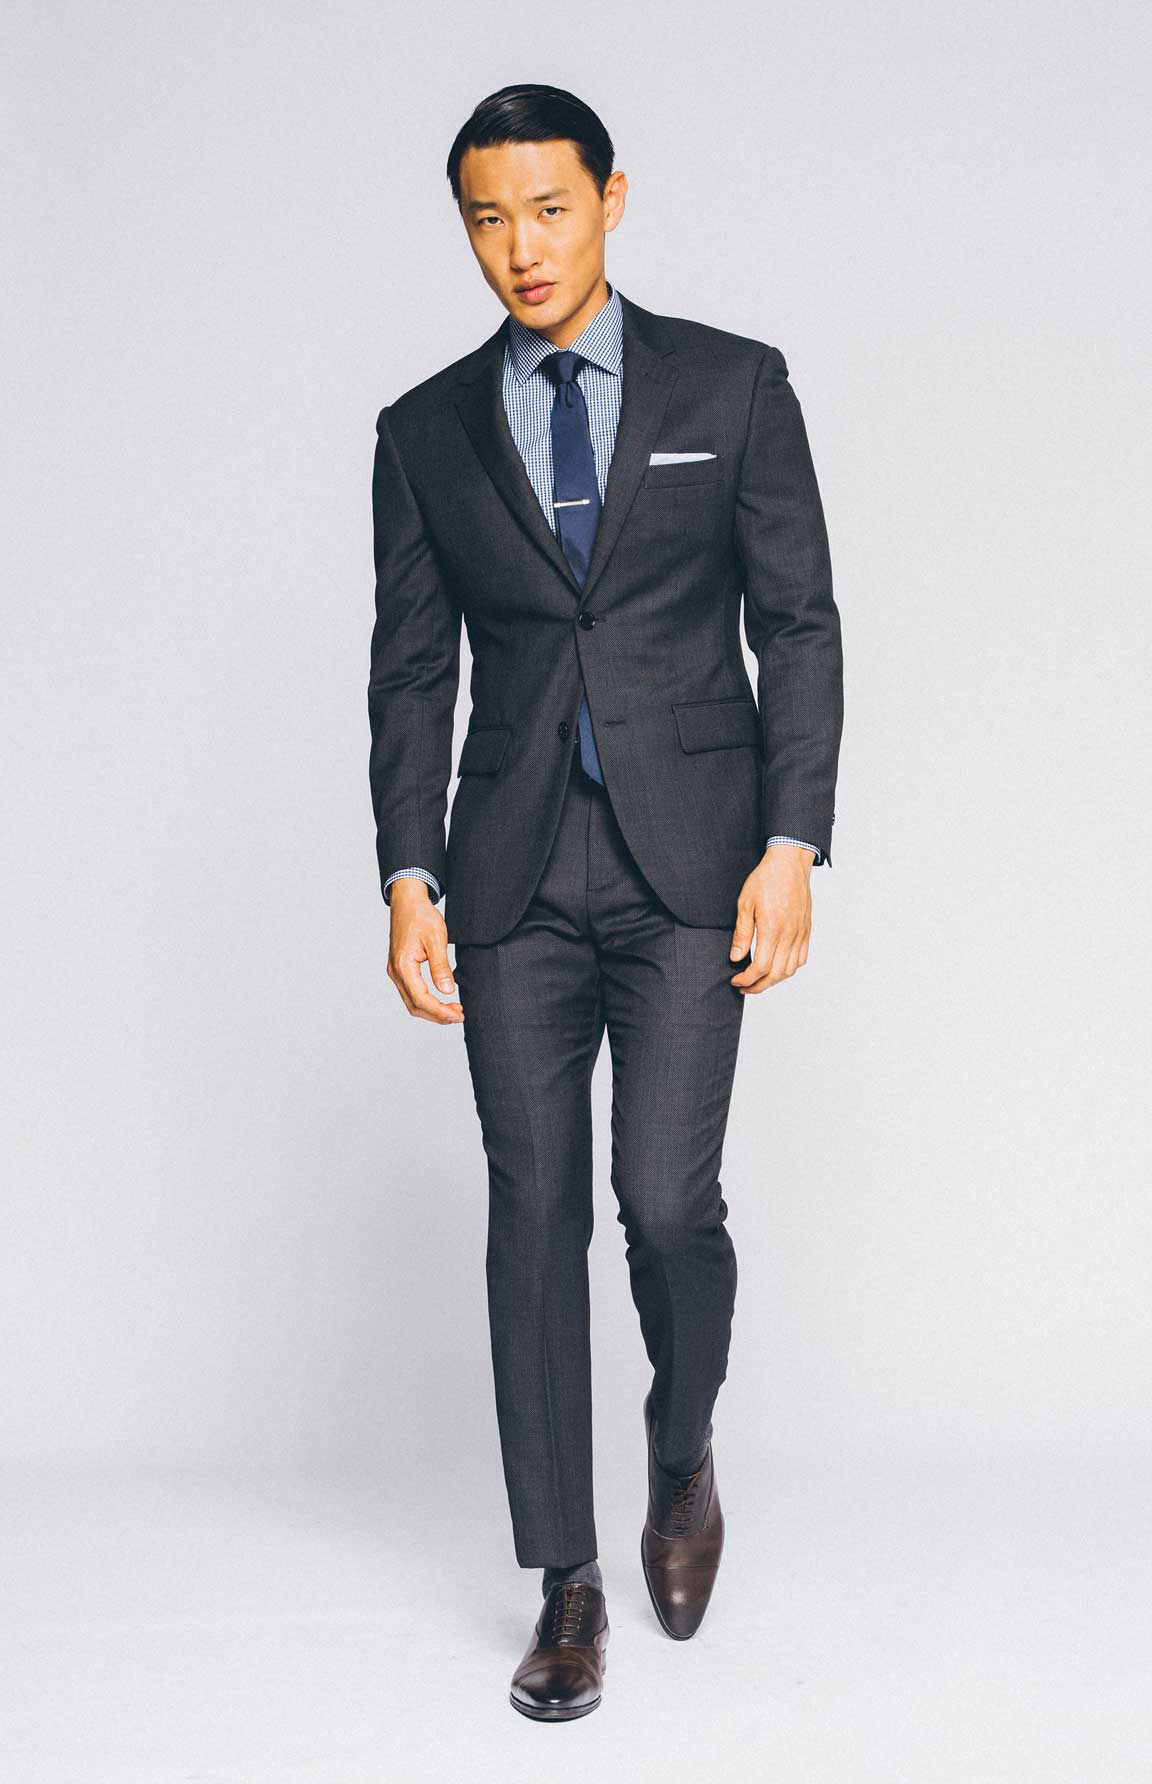 Dress to impress in our Premium Charcoal Suit.